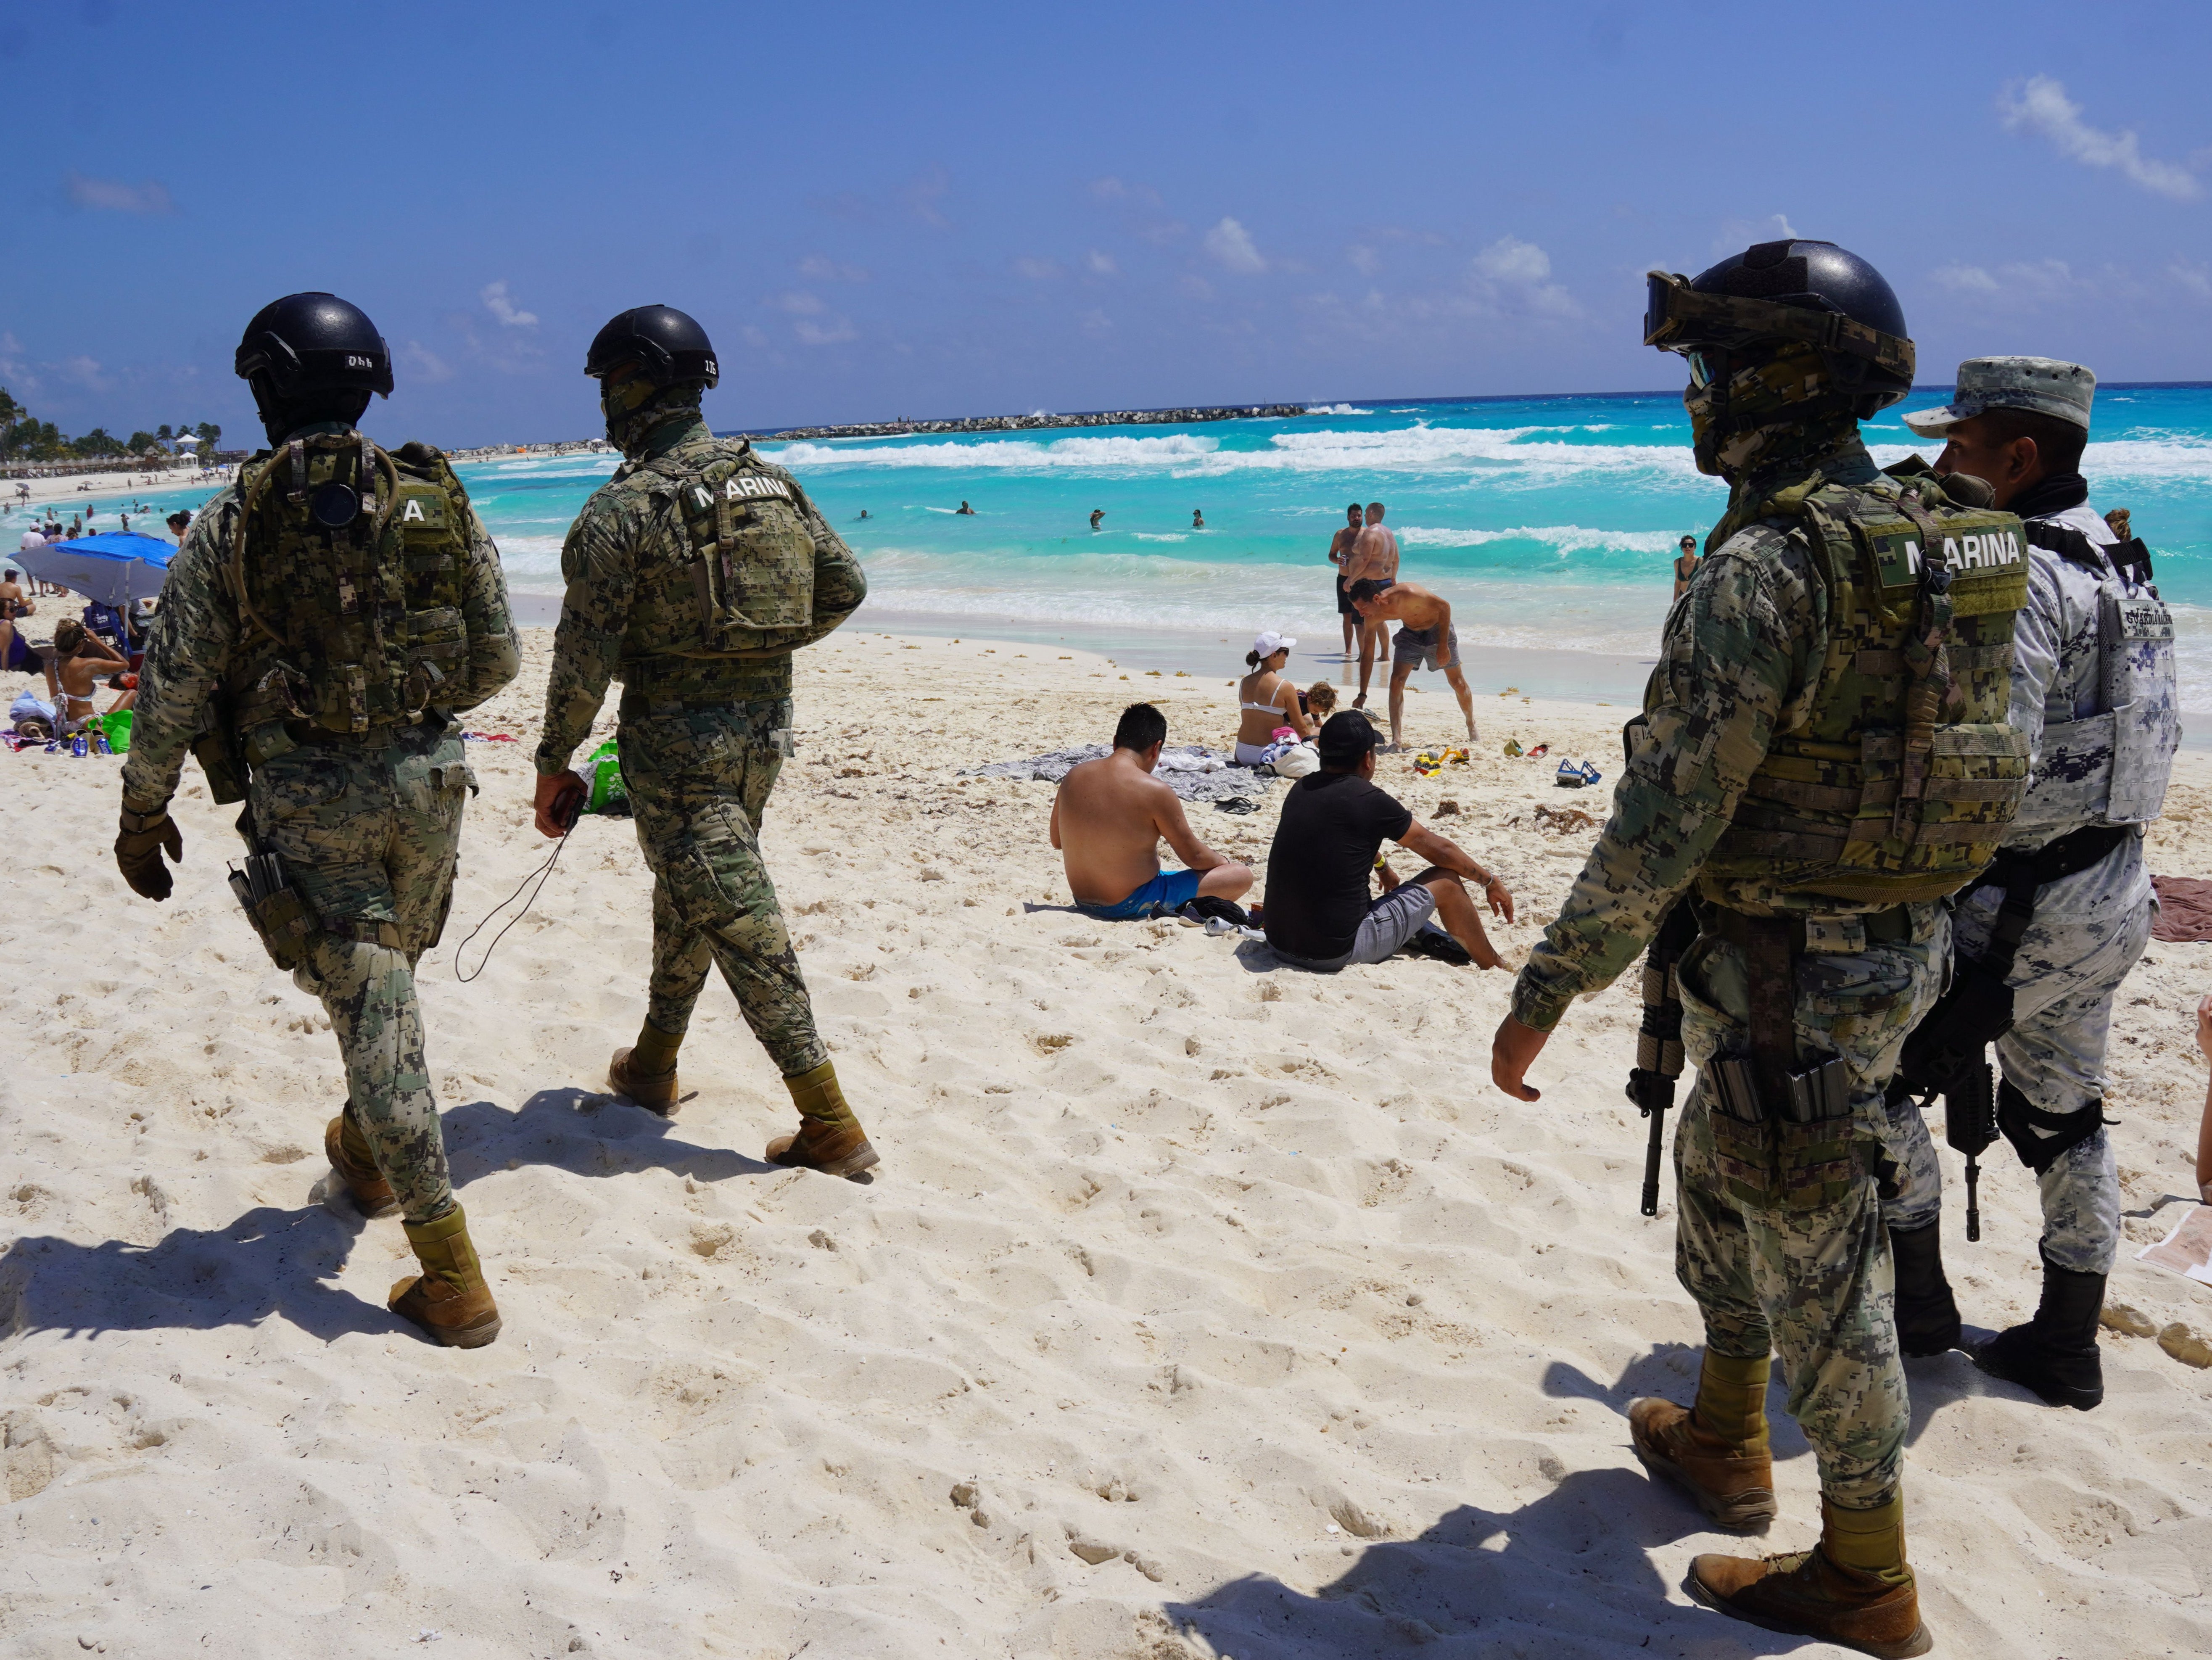 File photo: Members of the Mexican Navy and National Guard patrol the tourist beach area of Cancun, Quintana Roo state, Mexico on 18 March 2023